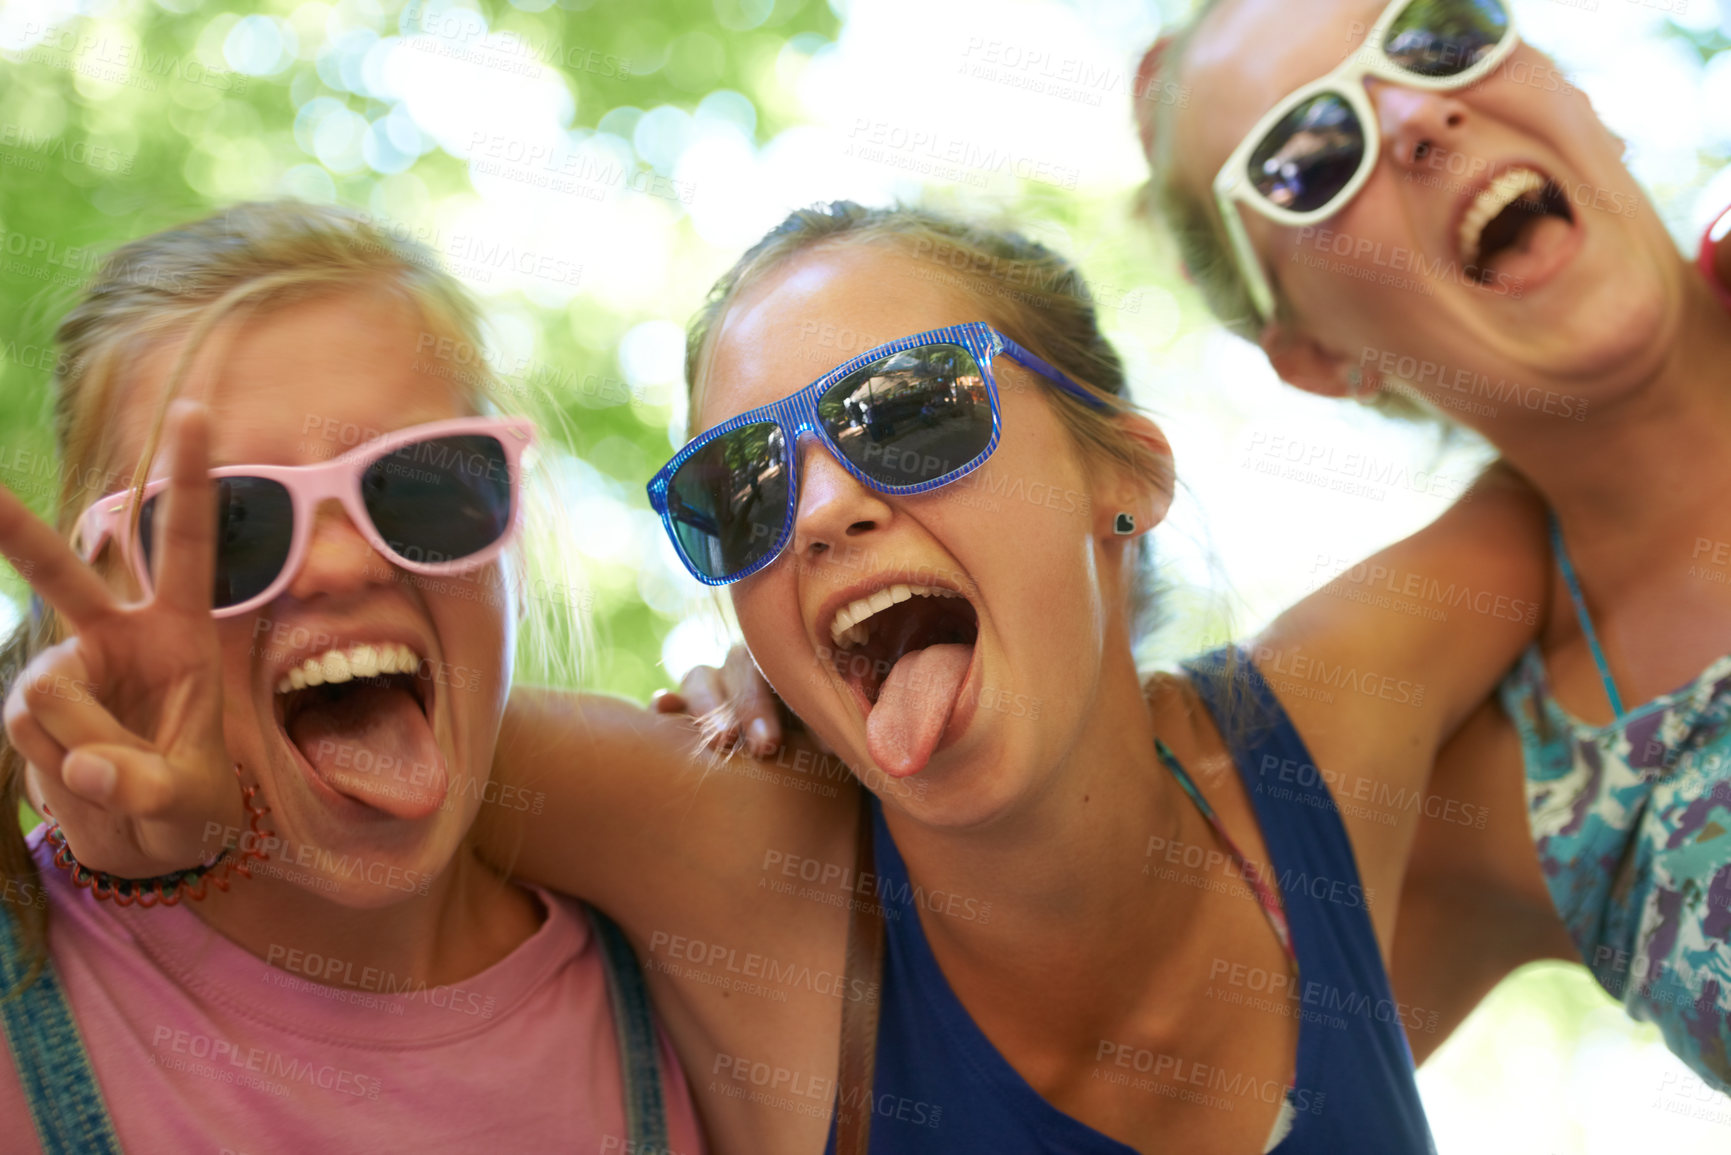 Buy stock photo Portrait, music festival and women with sunglasses, funny and silly with happiness and bonding together. Funky eyewear, goofy or outdoor with friends or peace sign with embrace, excited or summer fun